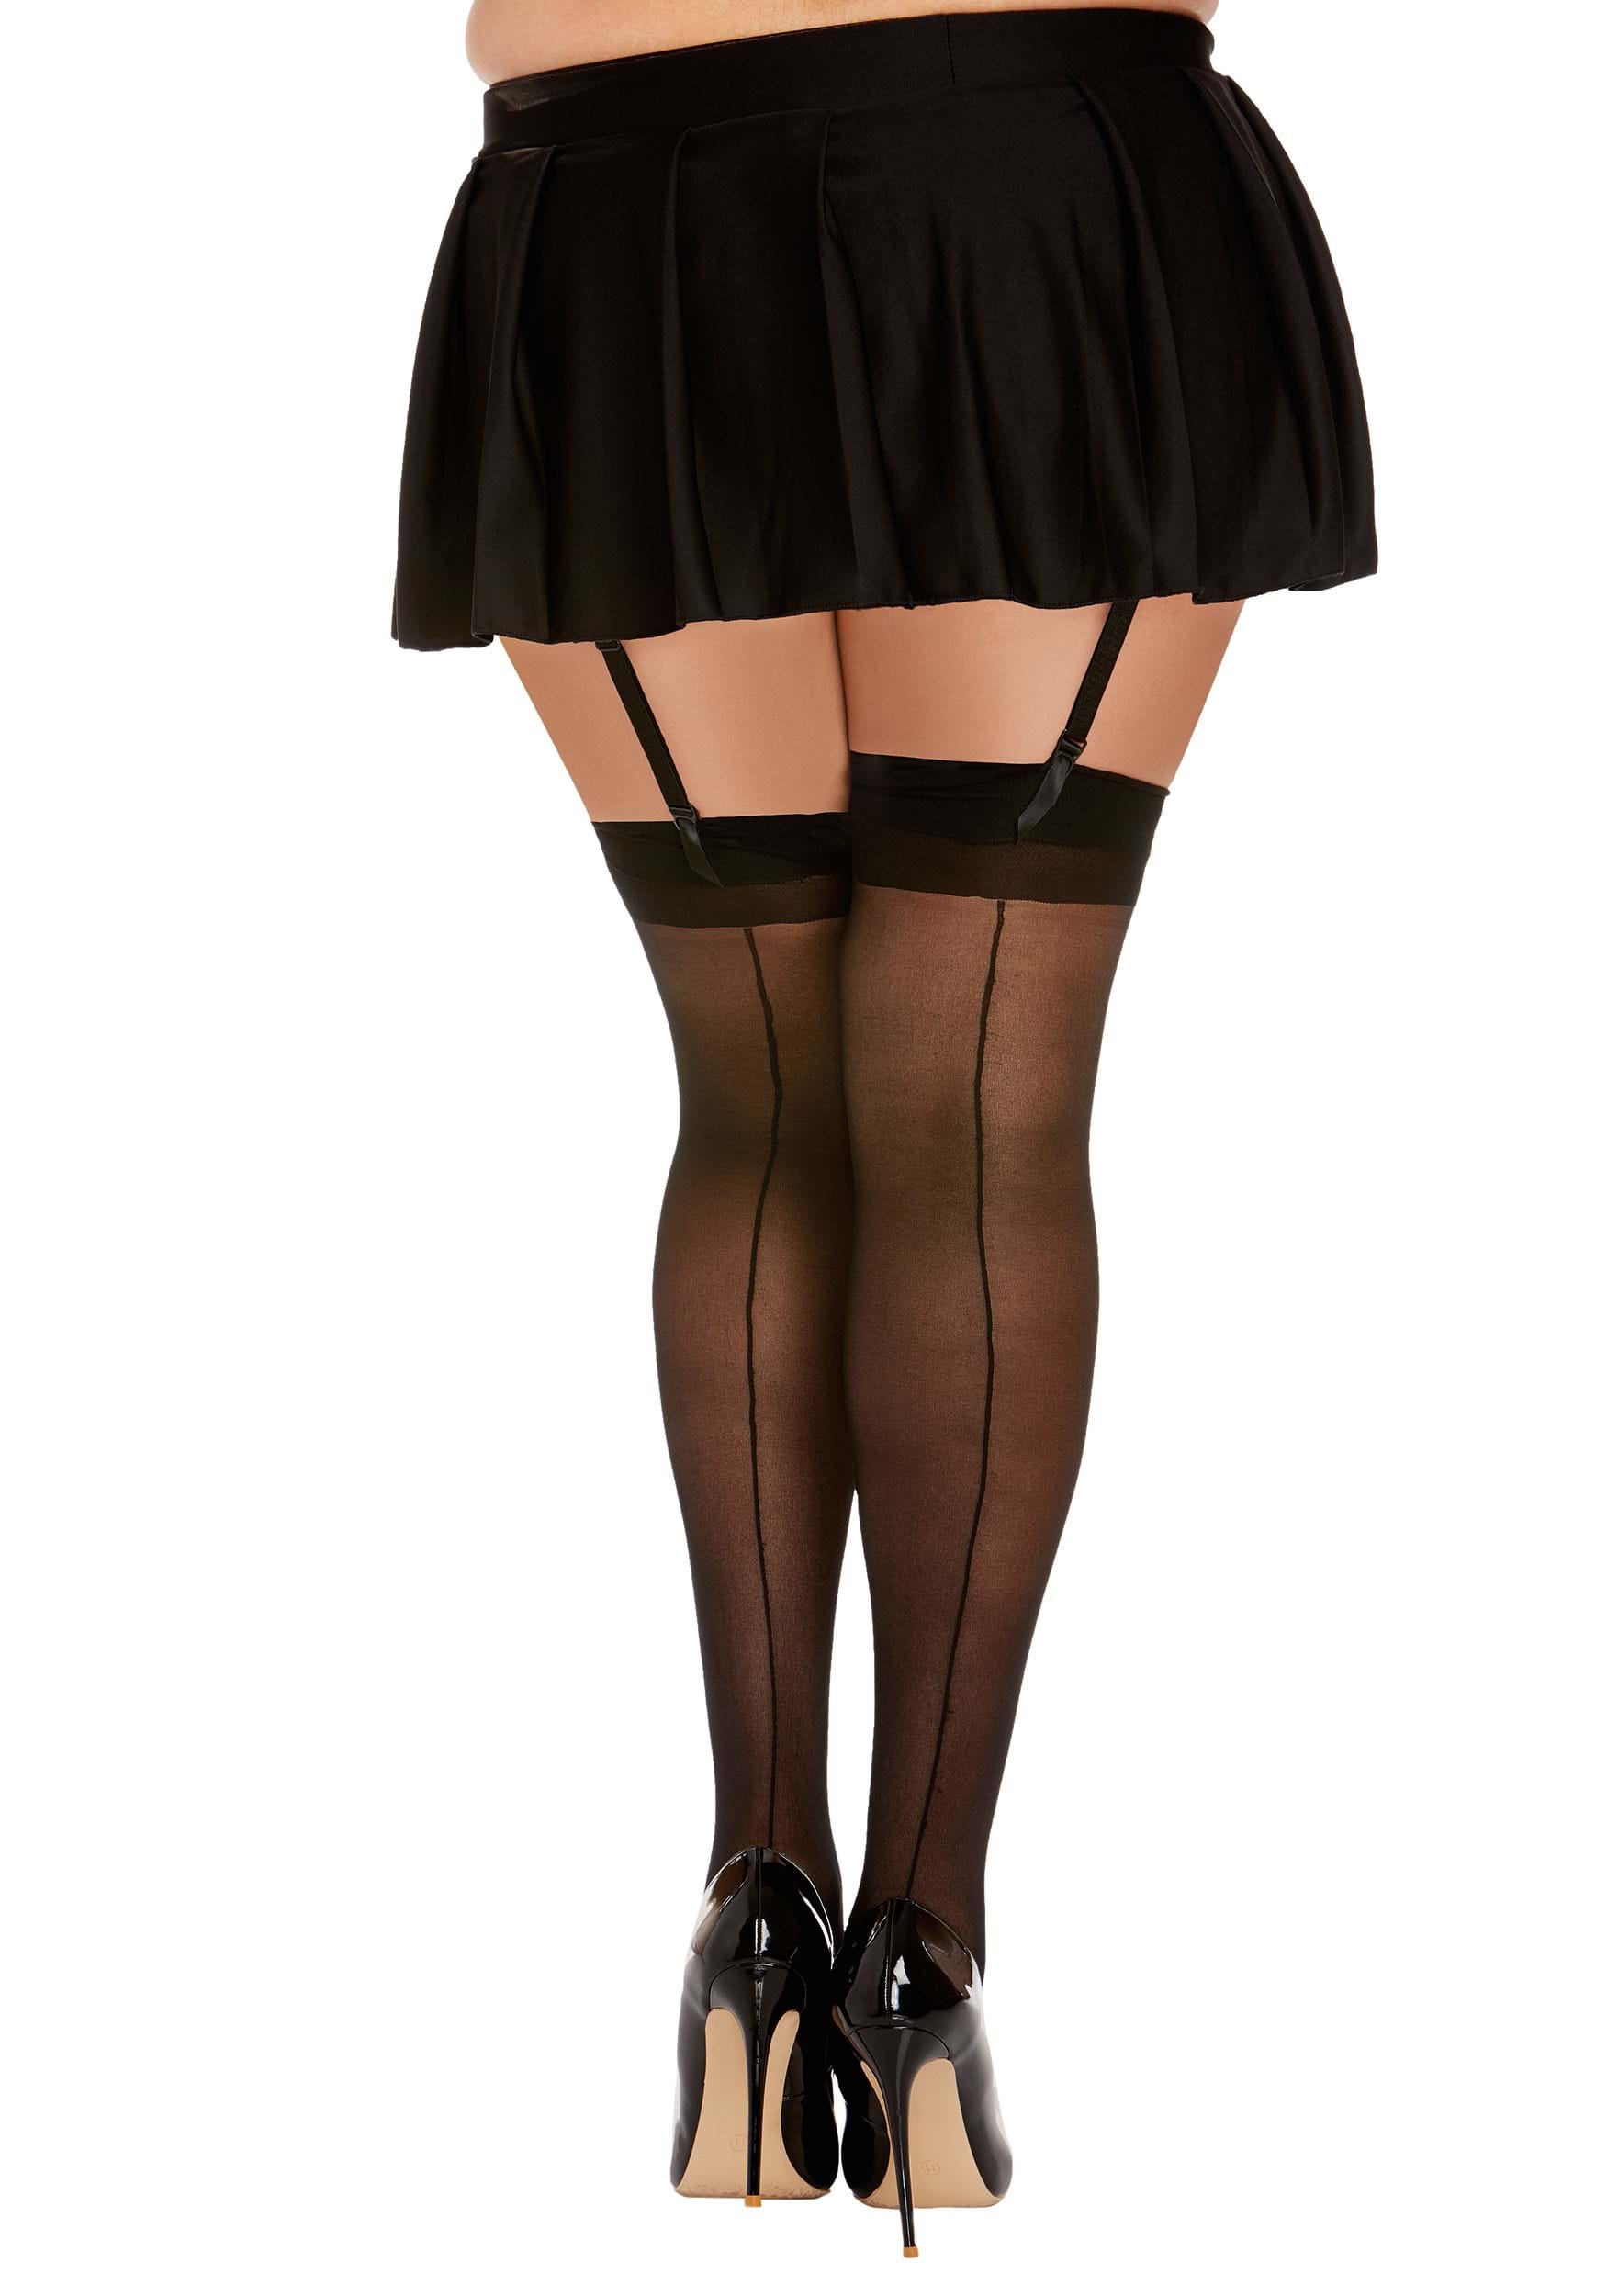 Plus Size Black Thigh High Stockings with Back Seam for Adults